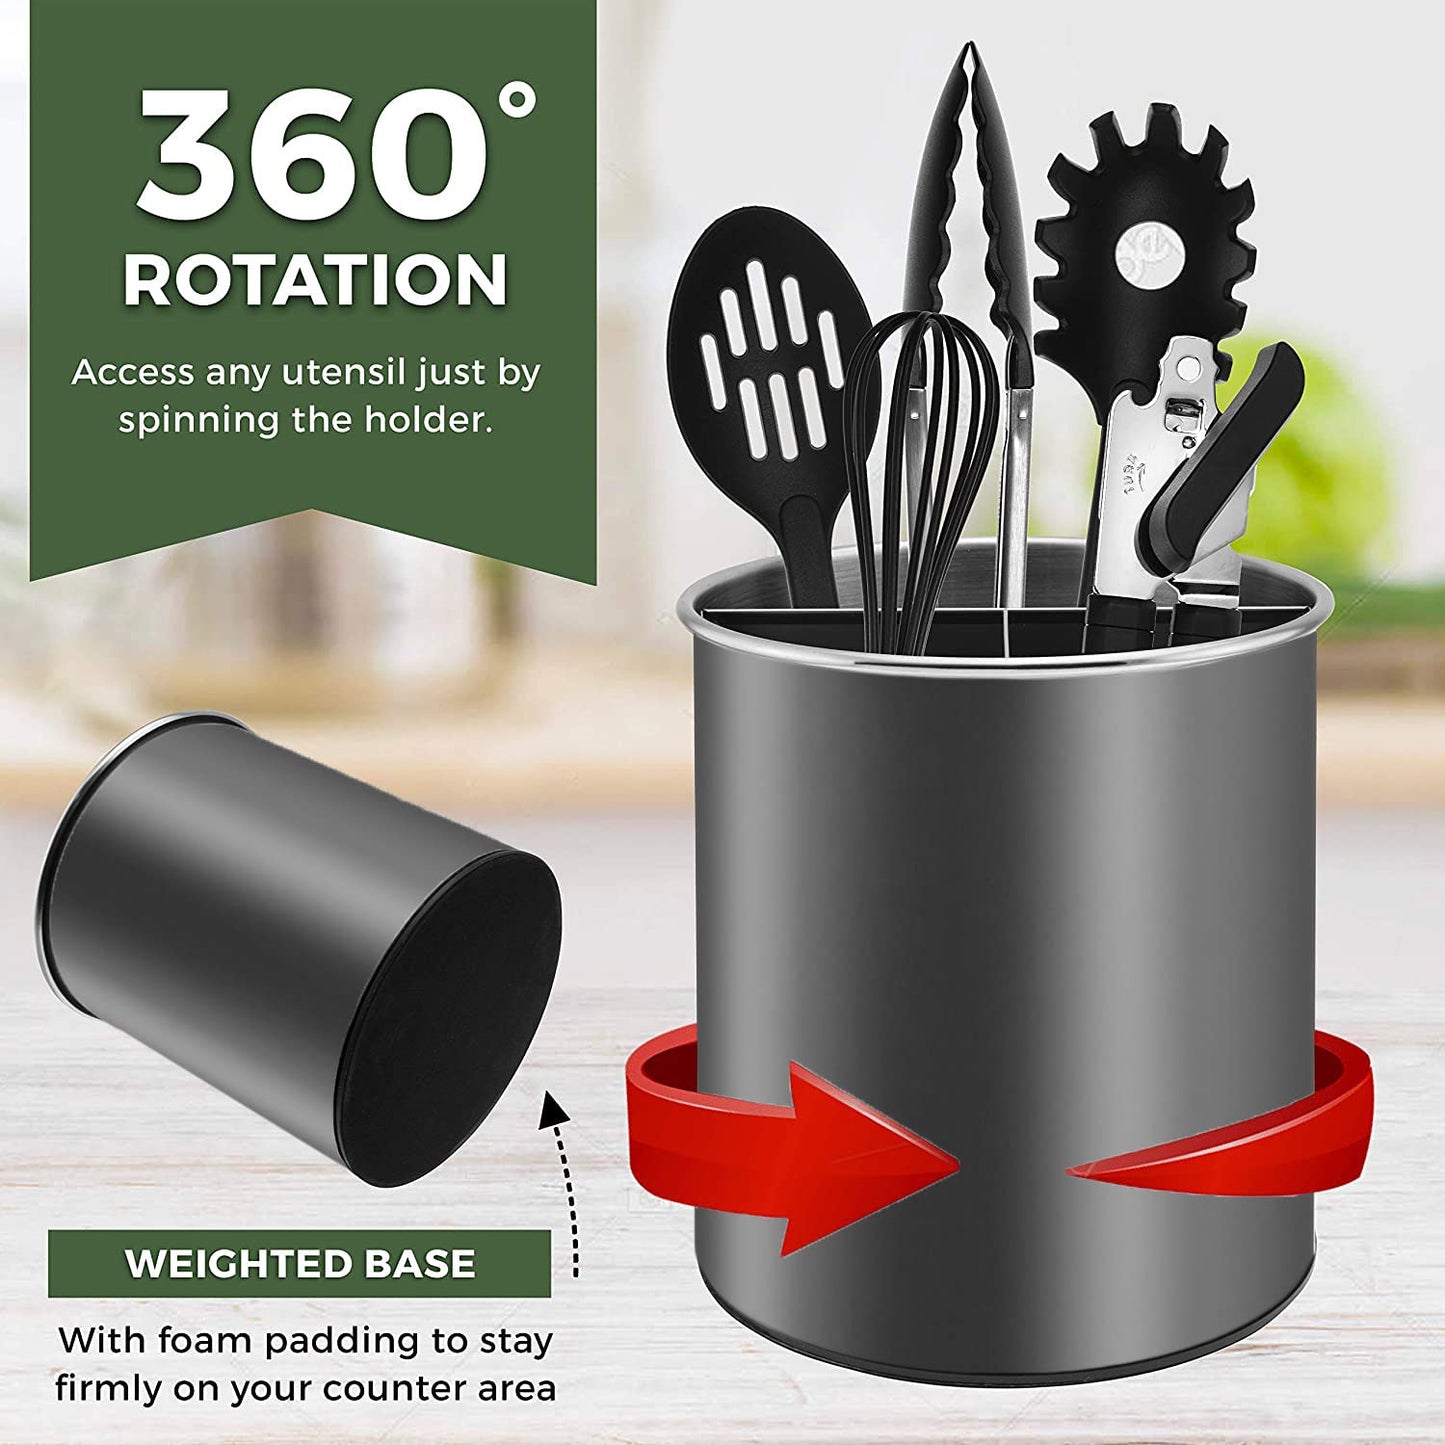 Bartnelli Extra Large Stainless Steel Kitchen Utensil Holder - 360° Rotating Utensil Caddy - Weighted Base for Stability - Countertop Organizer Crock With Removable Divider (IRON GRAY)